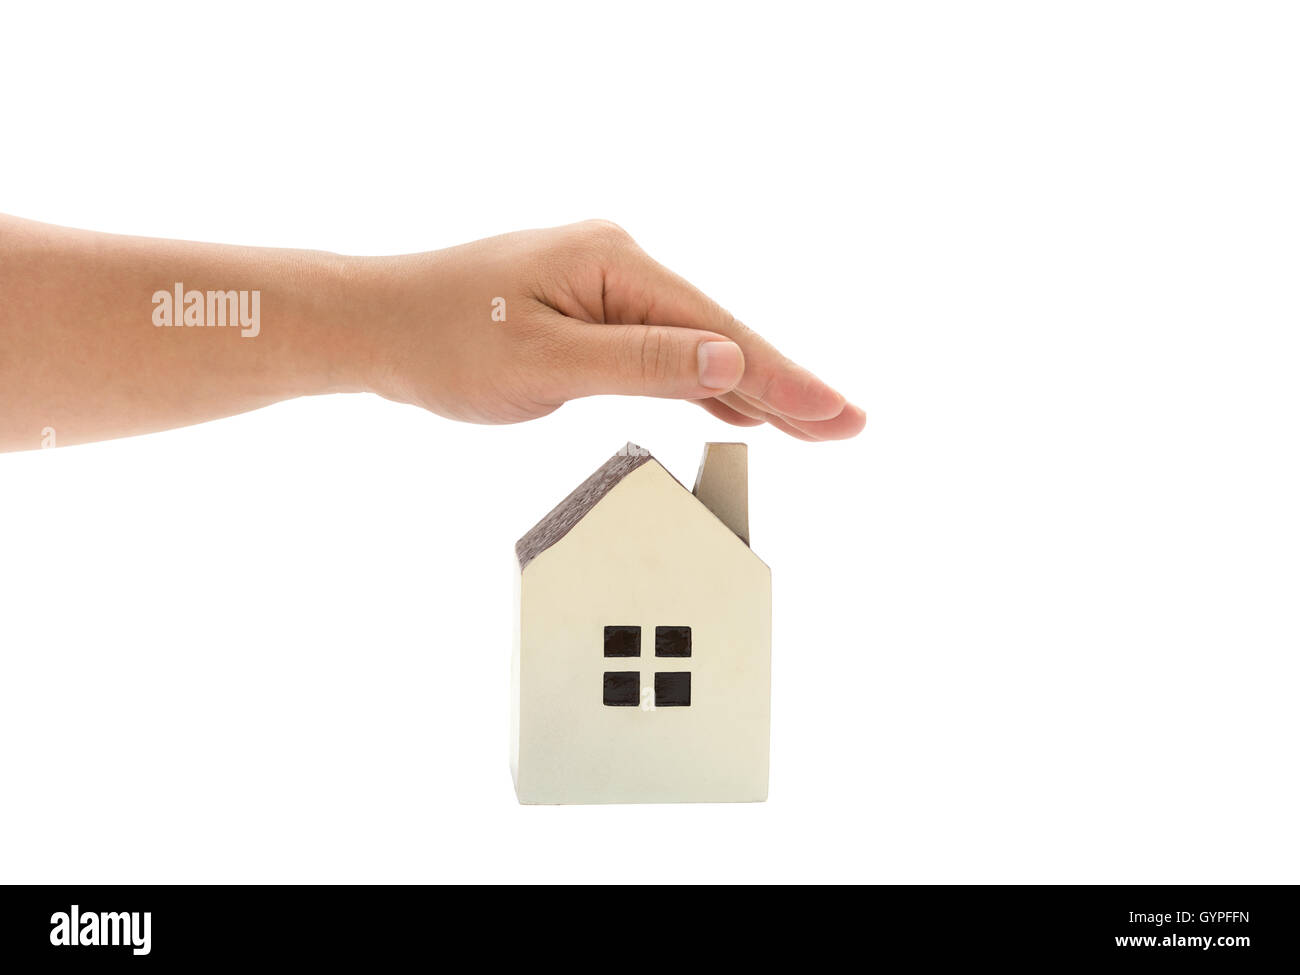 left hand covering a small family house, home insurance concept or representing home ownership Stock Photo